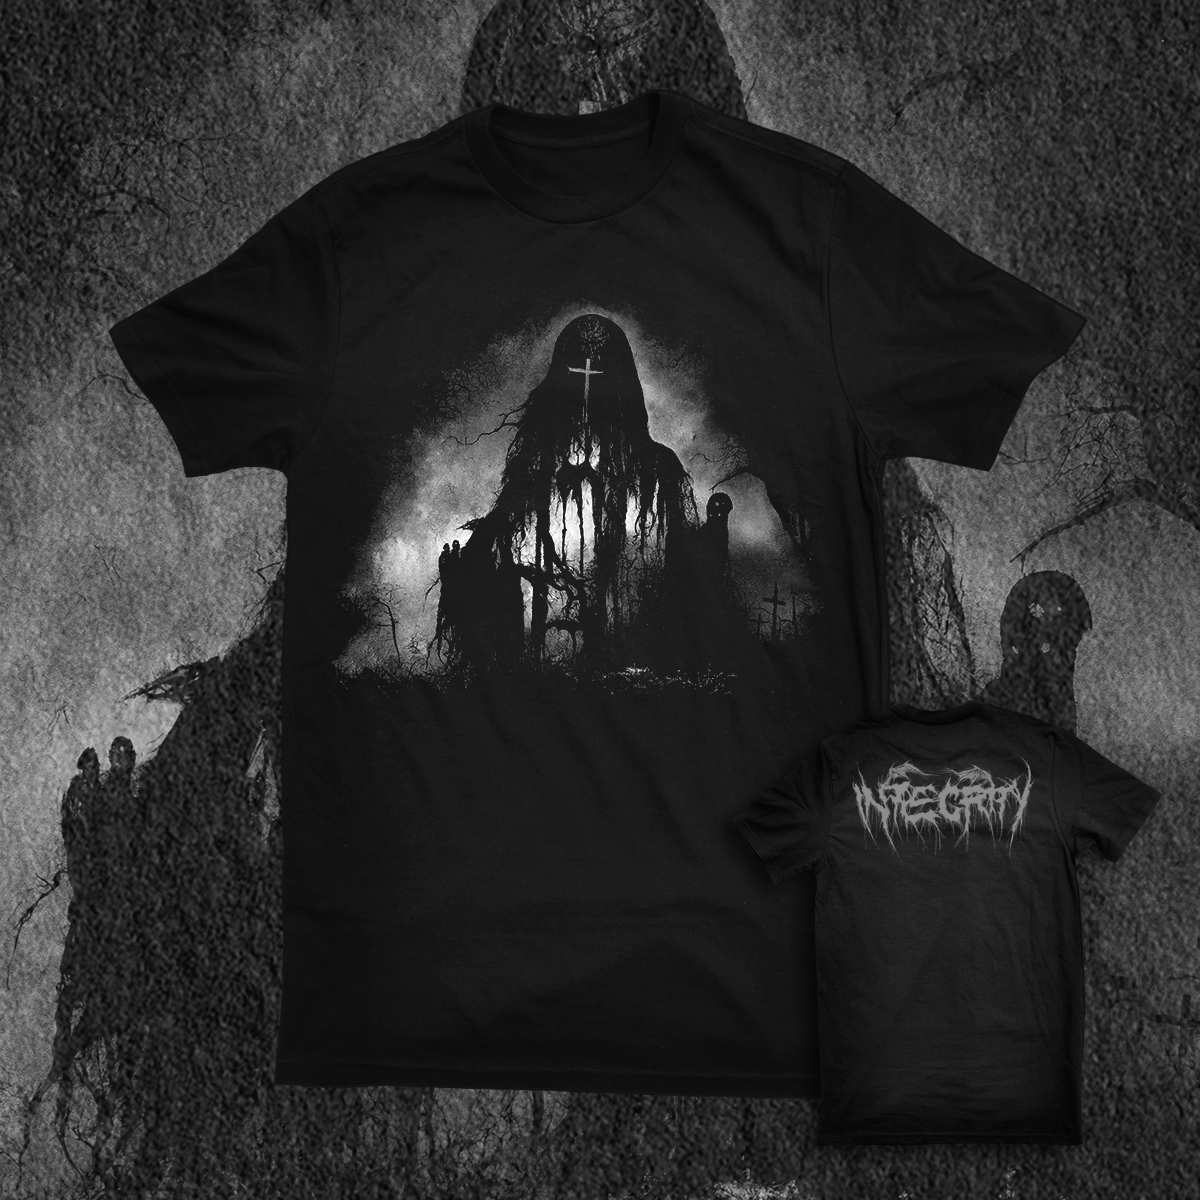 INTEGRITY "GHOUL" SHIRT